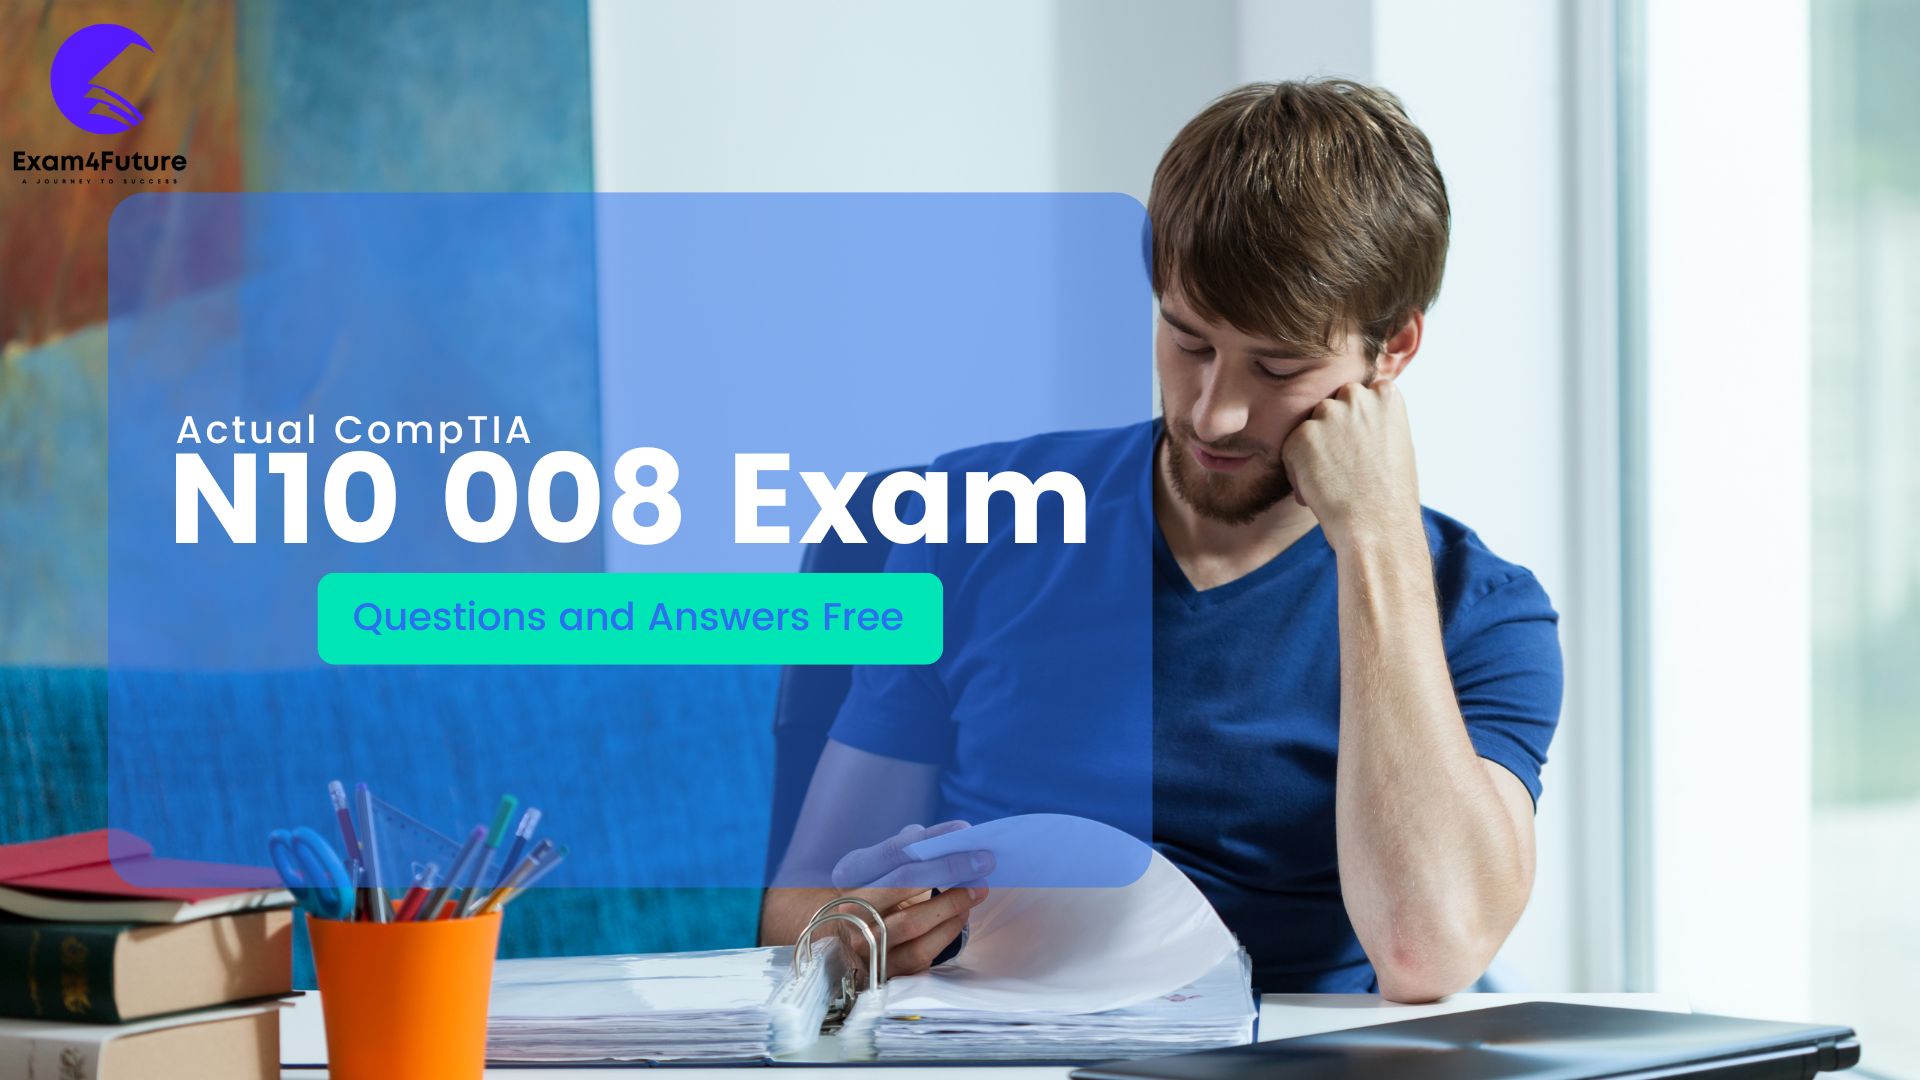 N10 008 Exam Questions and Answers